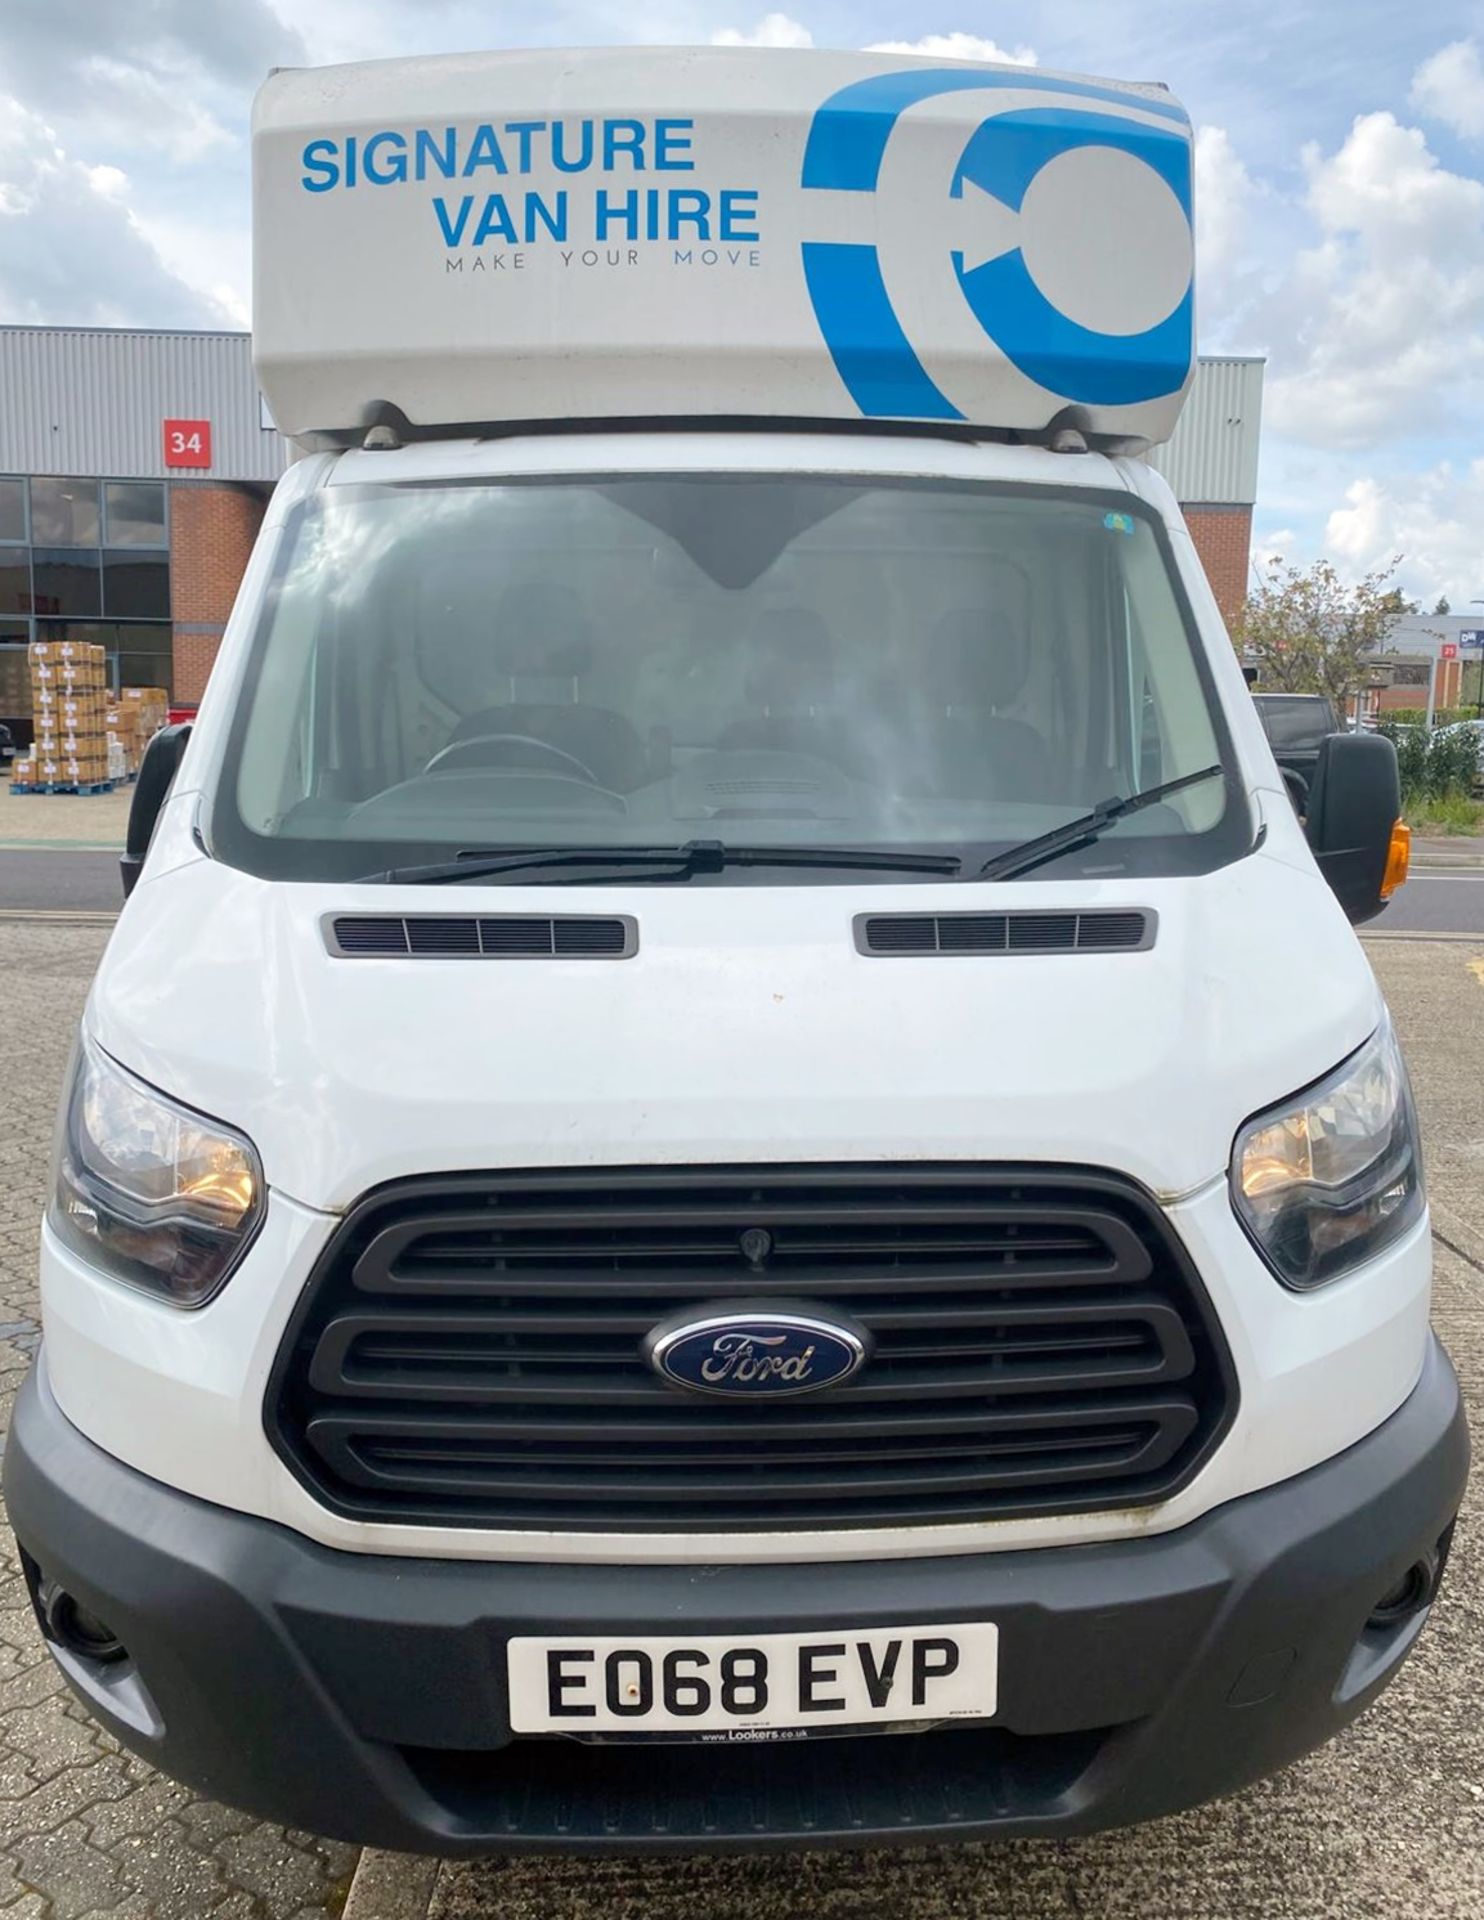 2018 Ford Transit 350 Luton Box Van With Tail Lift - 12 Month MOT - 20,712 Miles - ULEZ COMPLIANT - Image 2 of 19